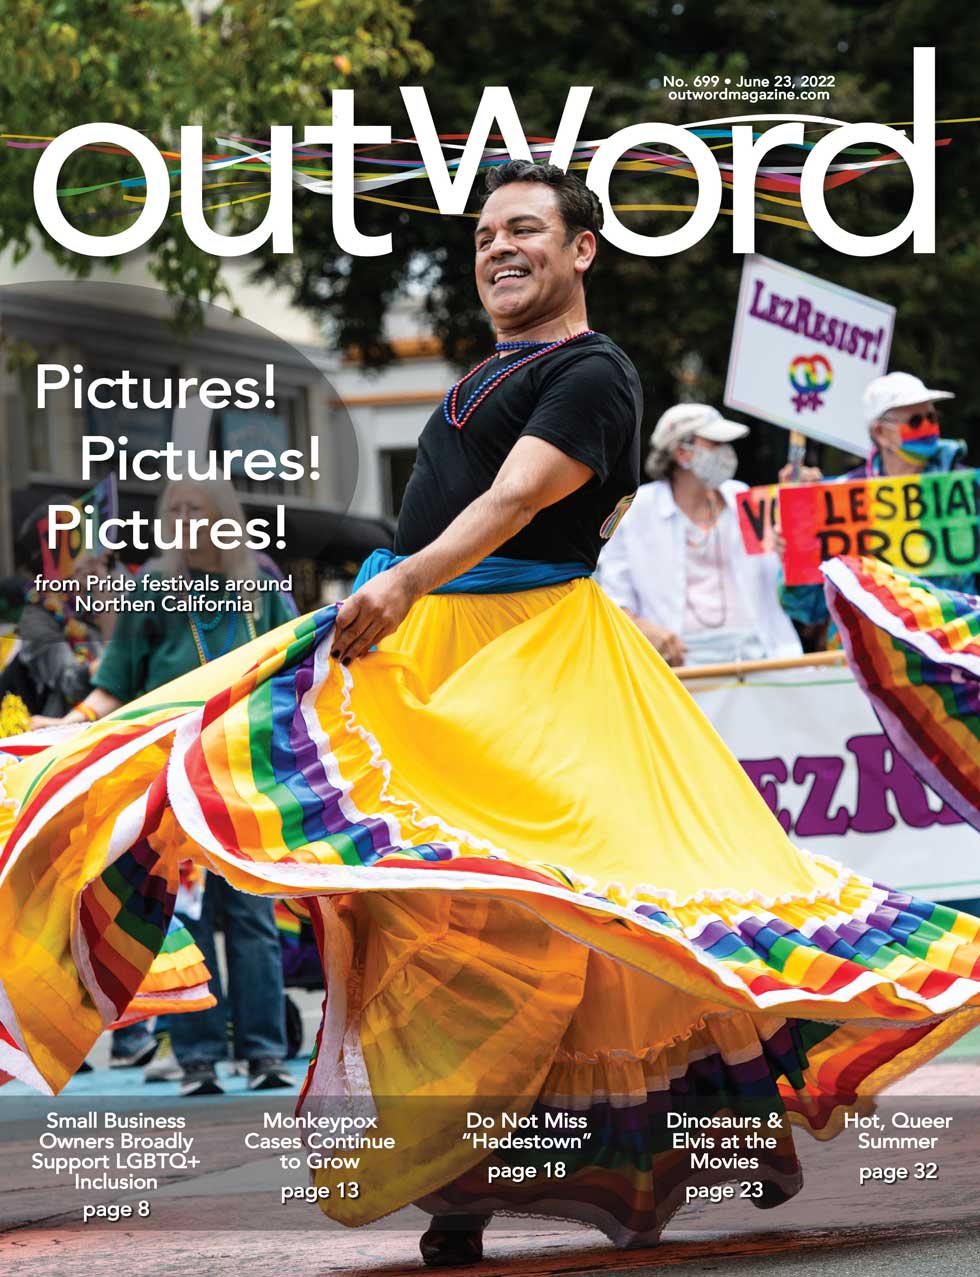 June 23, 2022 | Outword's Pride #3 Is Out Now!